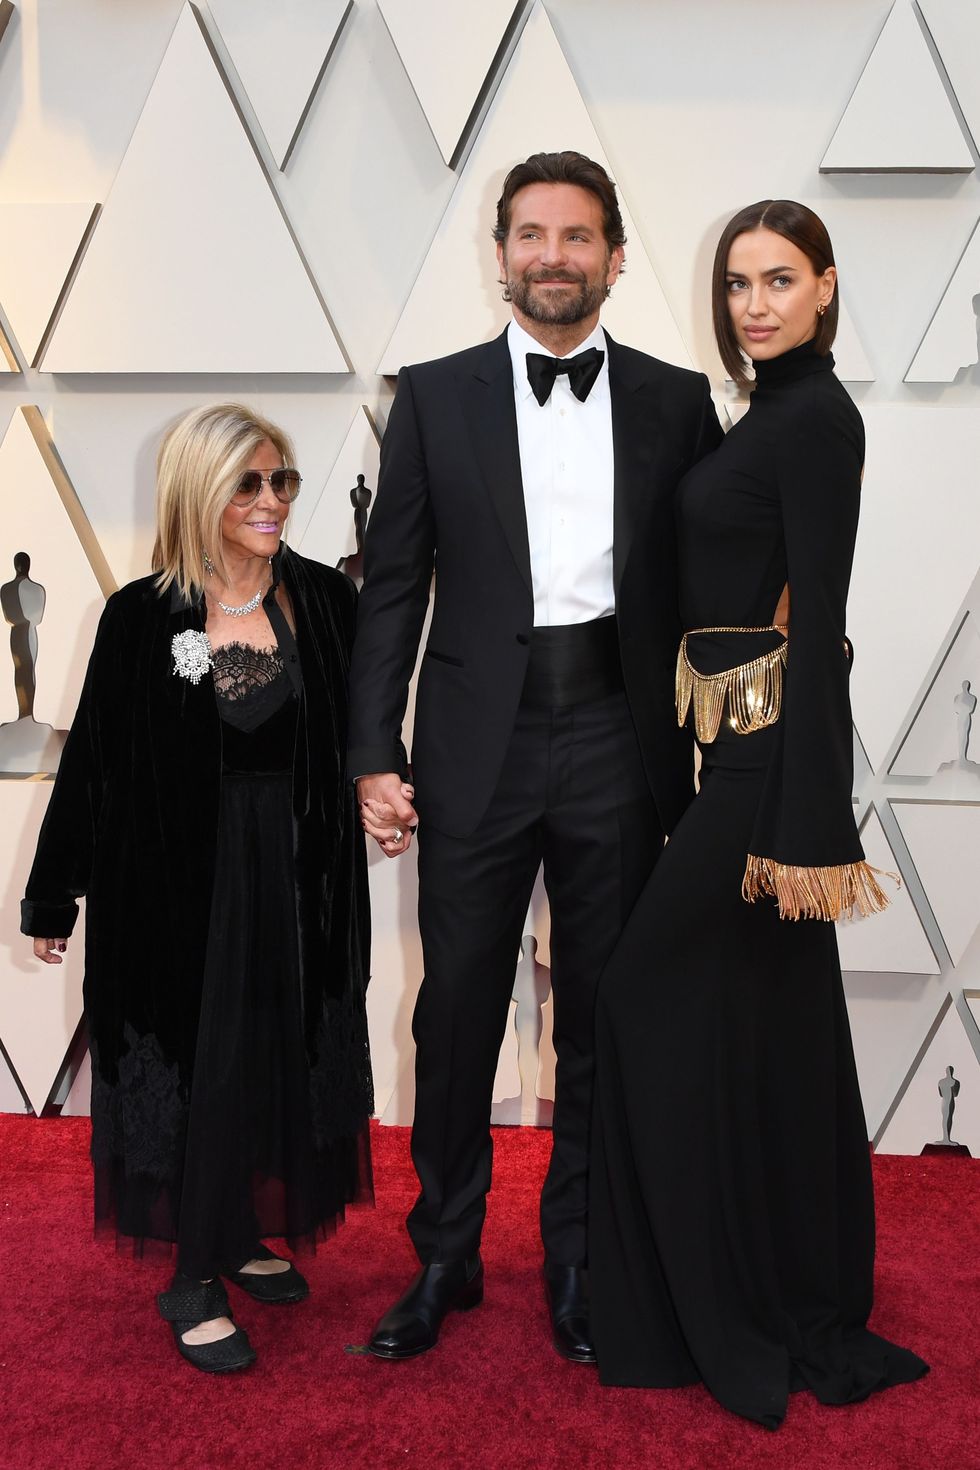 best actor nominee for a star is born bradley cooper c, his wife russian model irina shayk r and his mom gloria campano arrives for the 91st annual academy awards at the dolby theatre in hollywood, california on february 24, 2019 photo by mark ralston  afp        photo credit should read mark ralstonafp via getty images